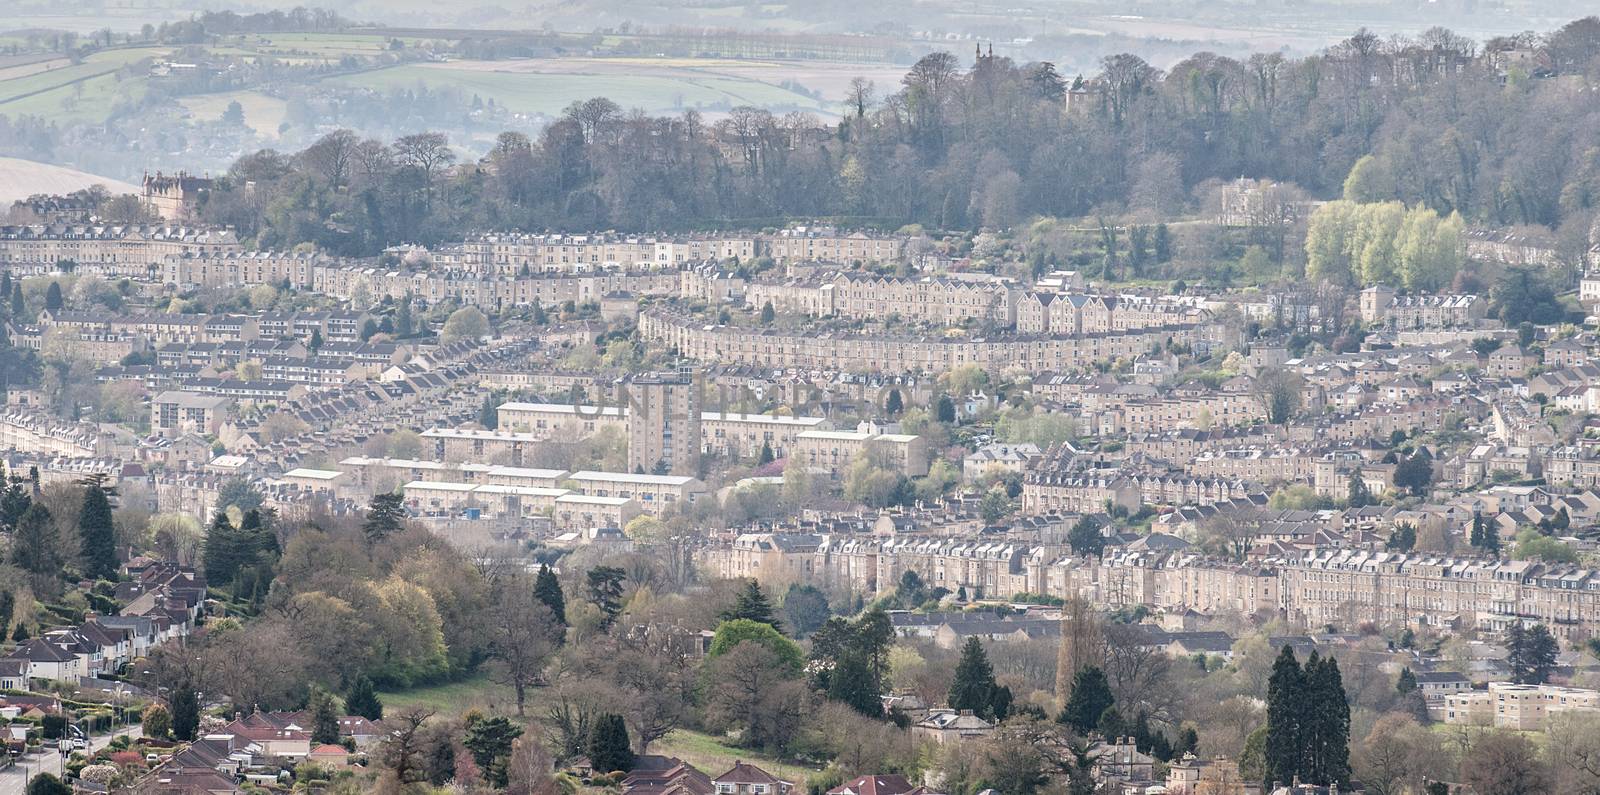 View of the City of Bath showing the extraordinary architecture and green spaces the place has to offer by sirspread